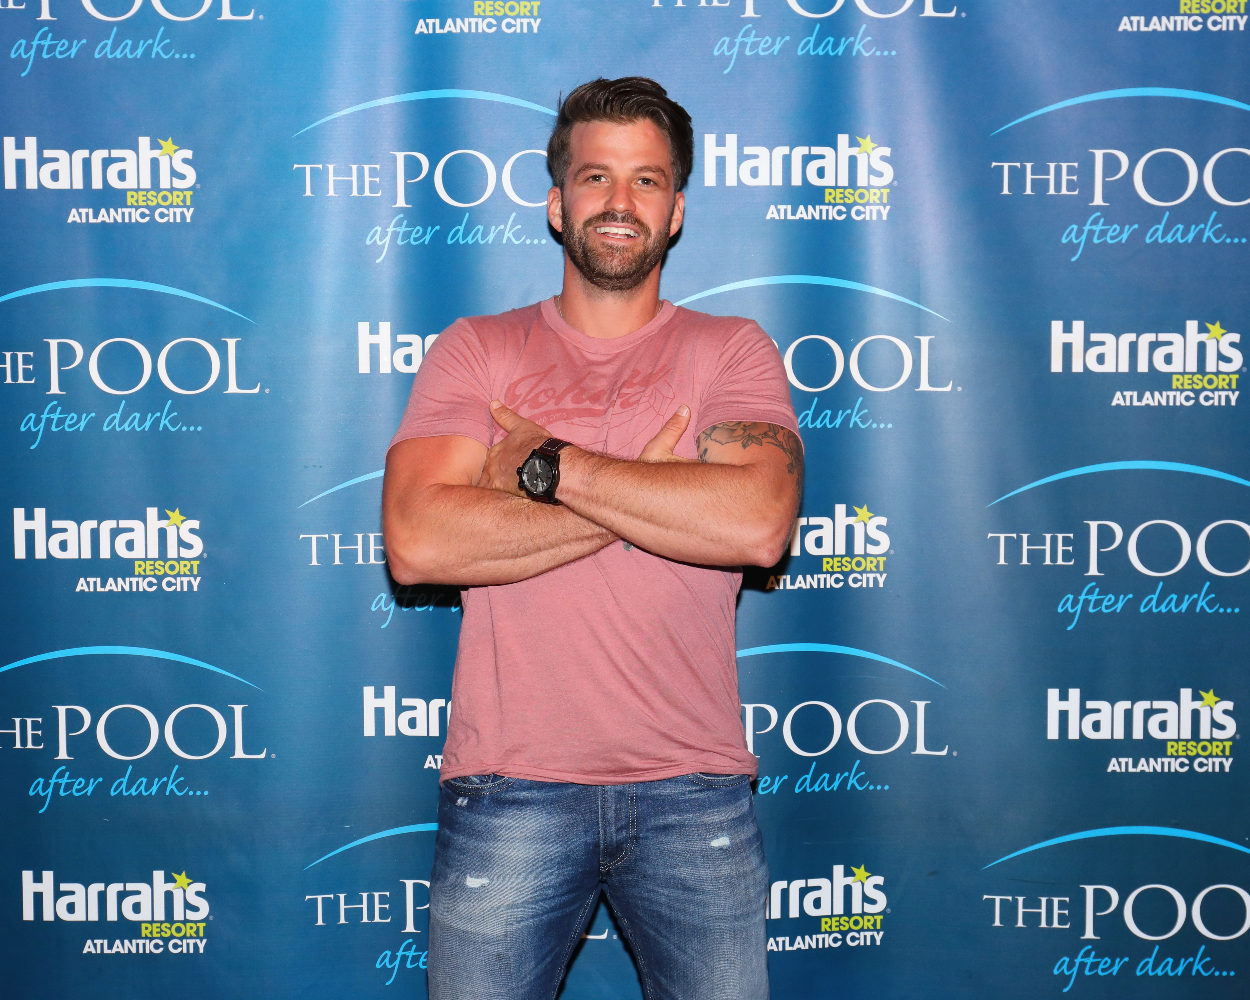 Johnny Bananas hosts The Pool After Dark